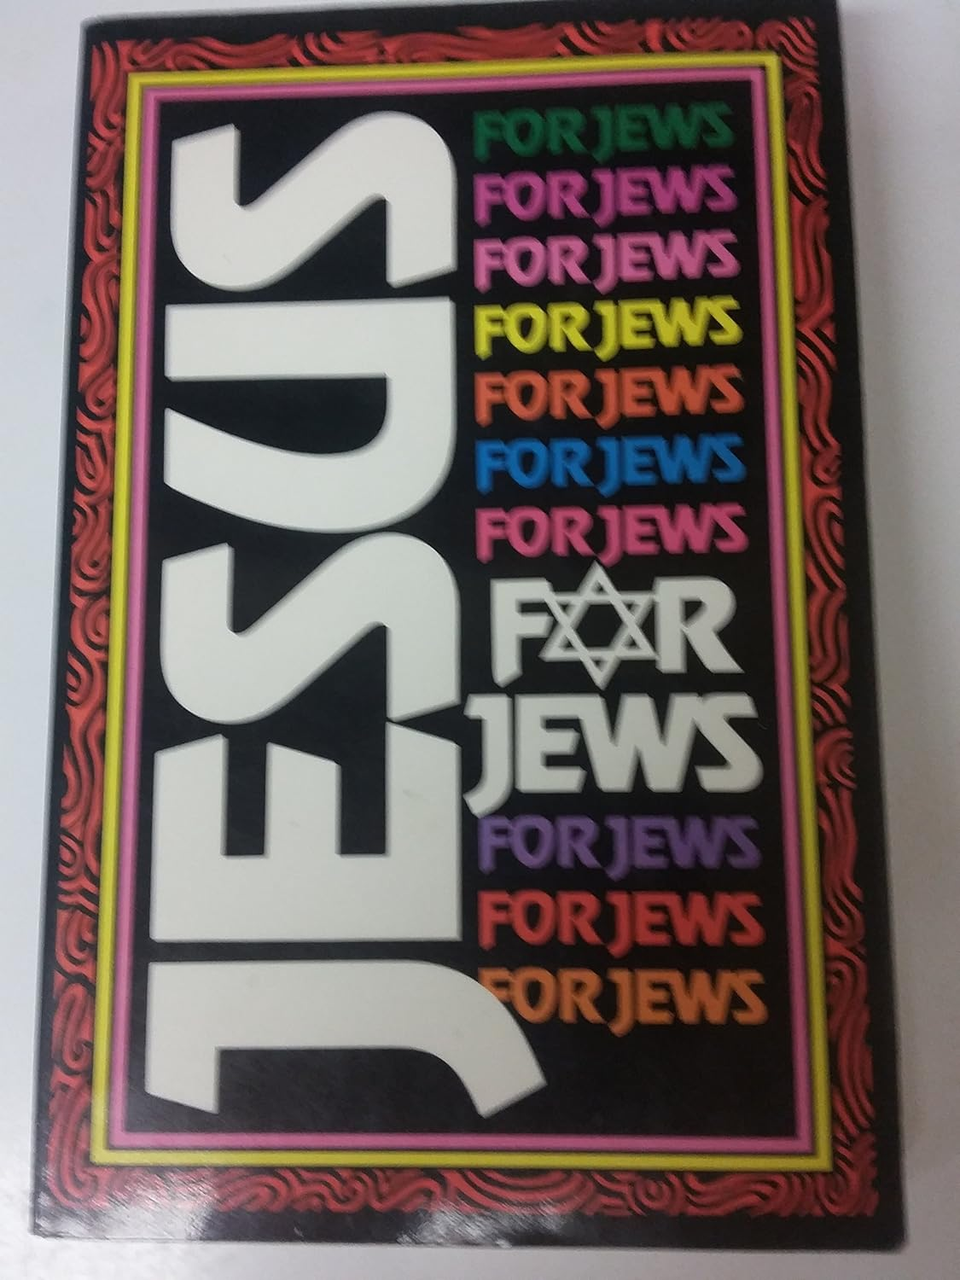 Jesus For Jews by Ruth Rosen